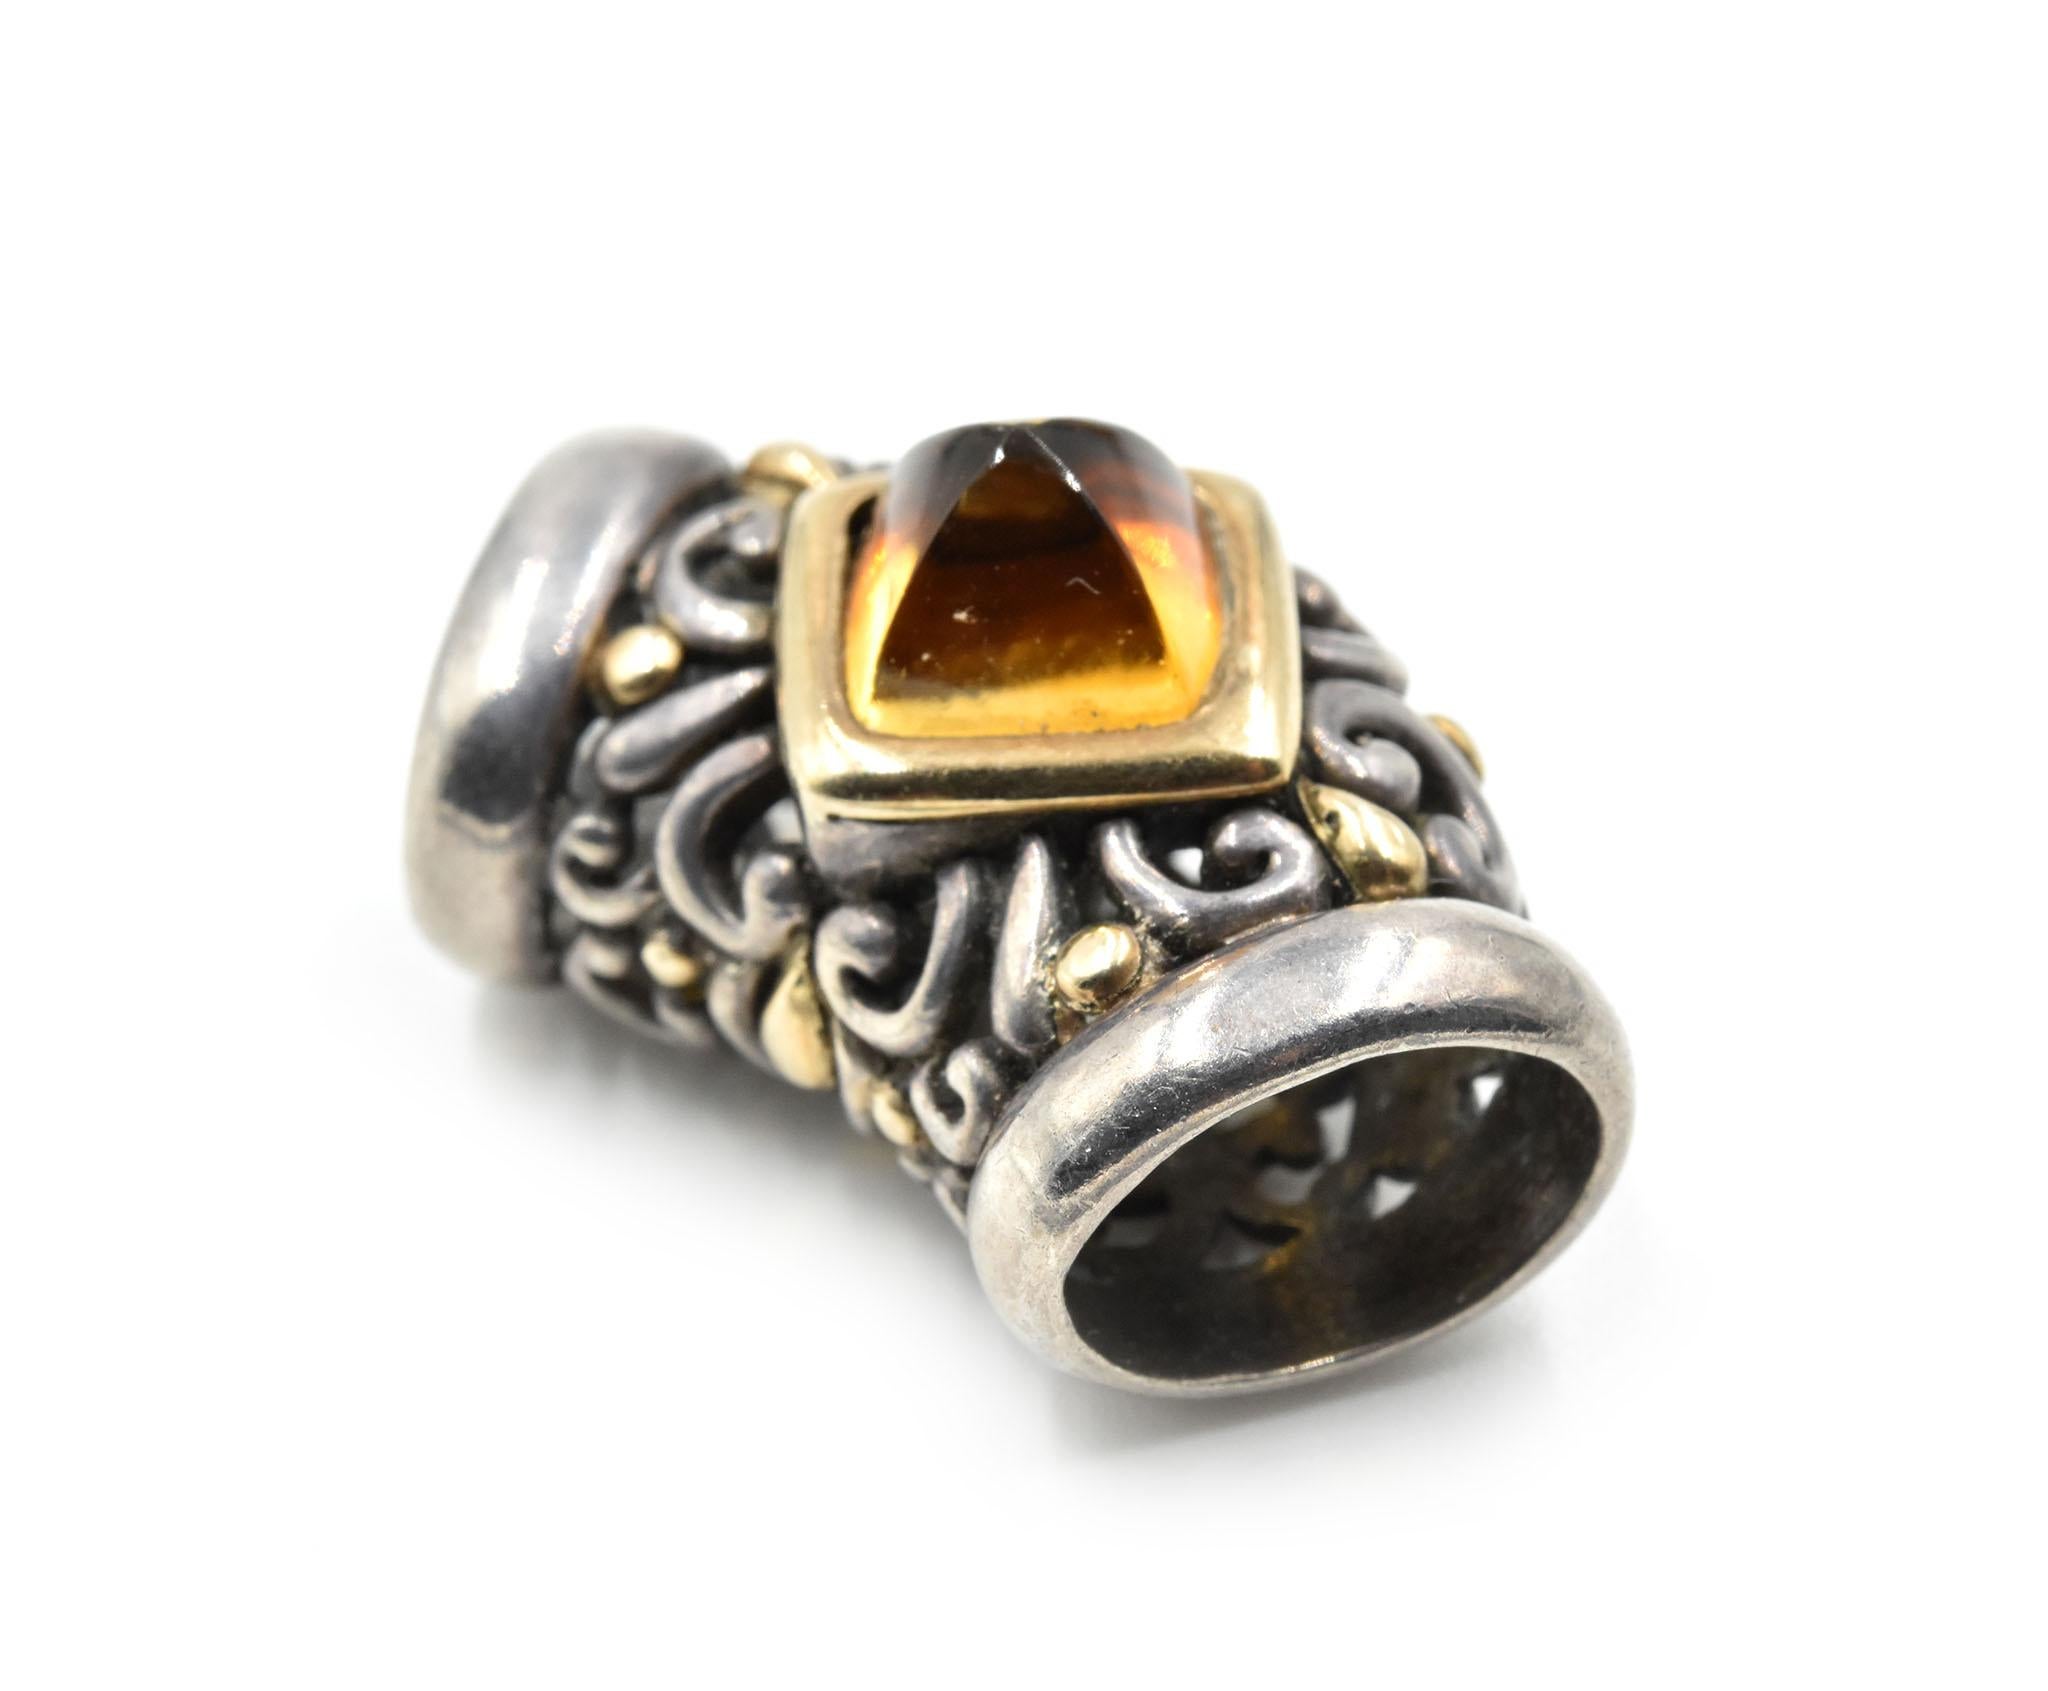 Designer: John Hardy
Material: sterling silver and 18k yellow gold
Dimensions: pendant measures 1-inch long and 1/2-inch wide
Weight: 8.61 grams
Retail: $750
